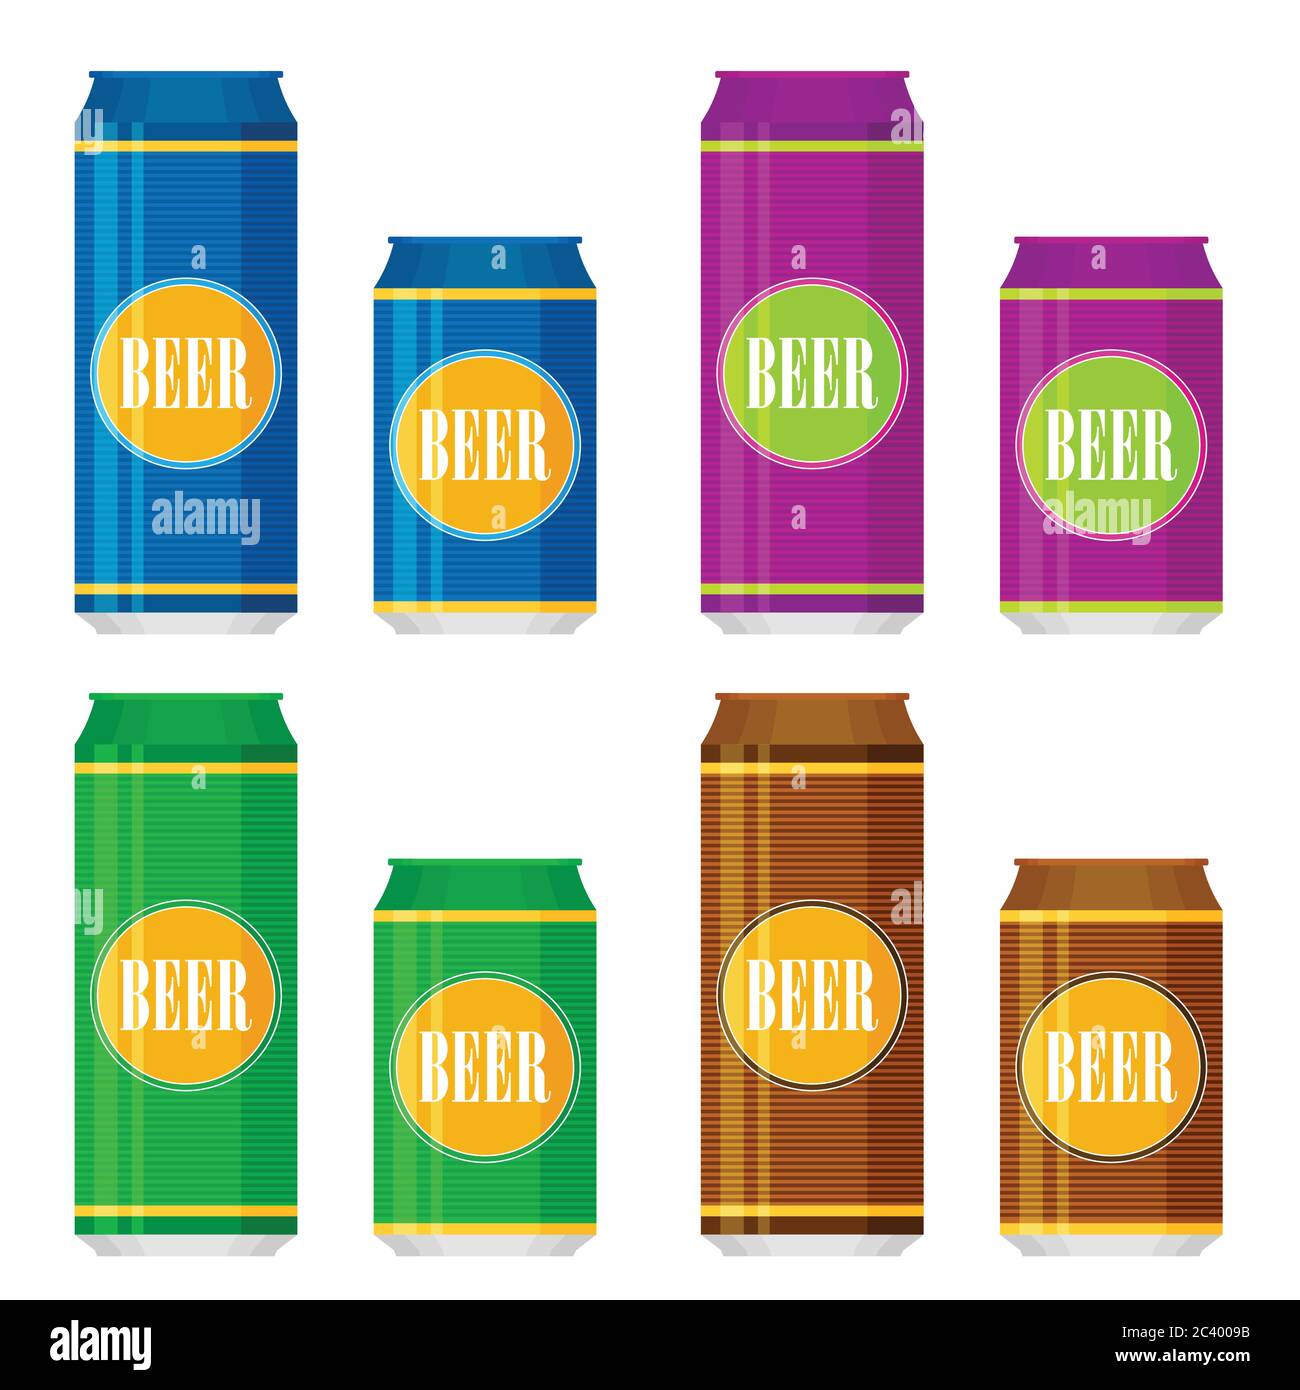 Lager cans Stock Vector Images - Alamy